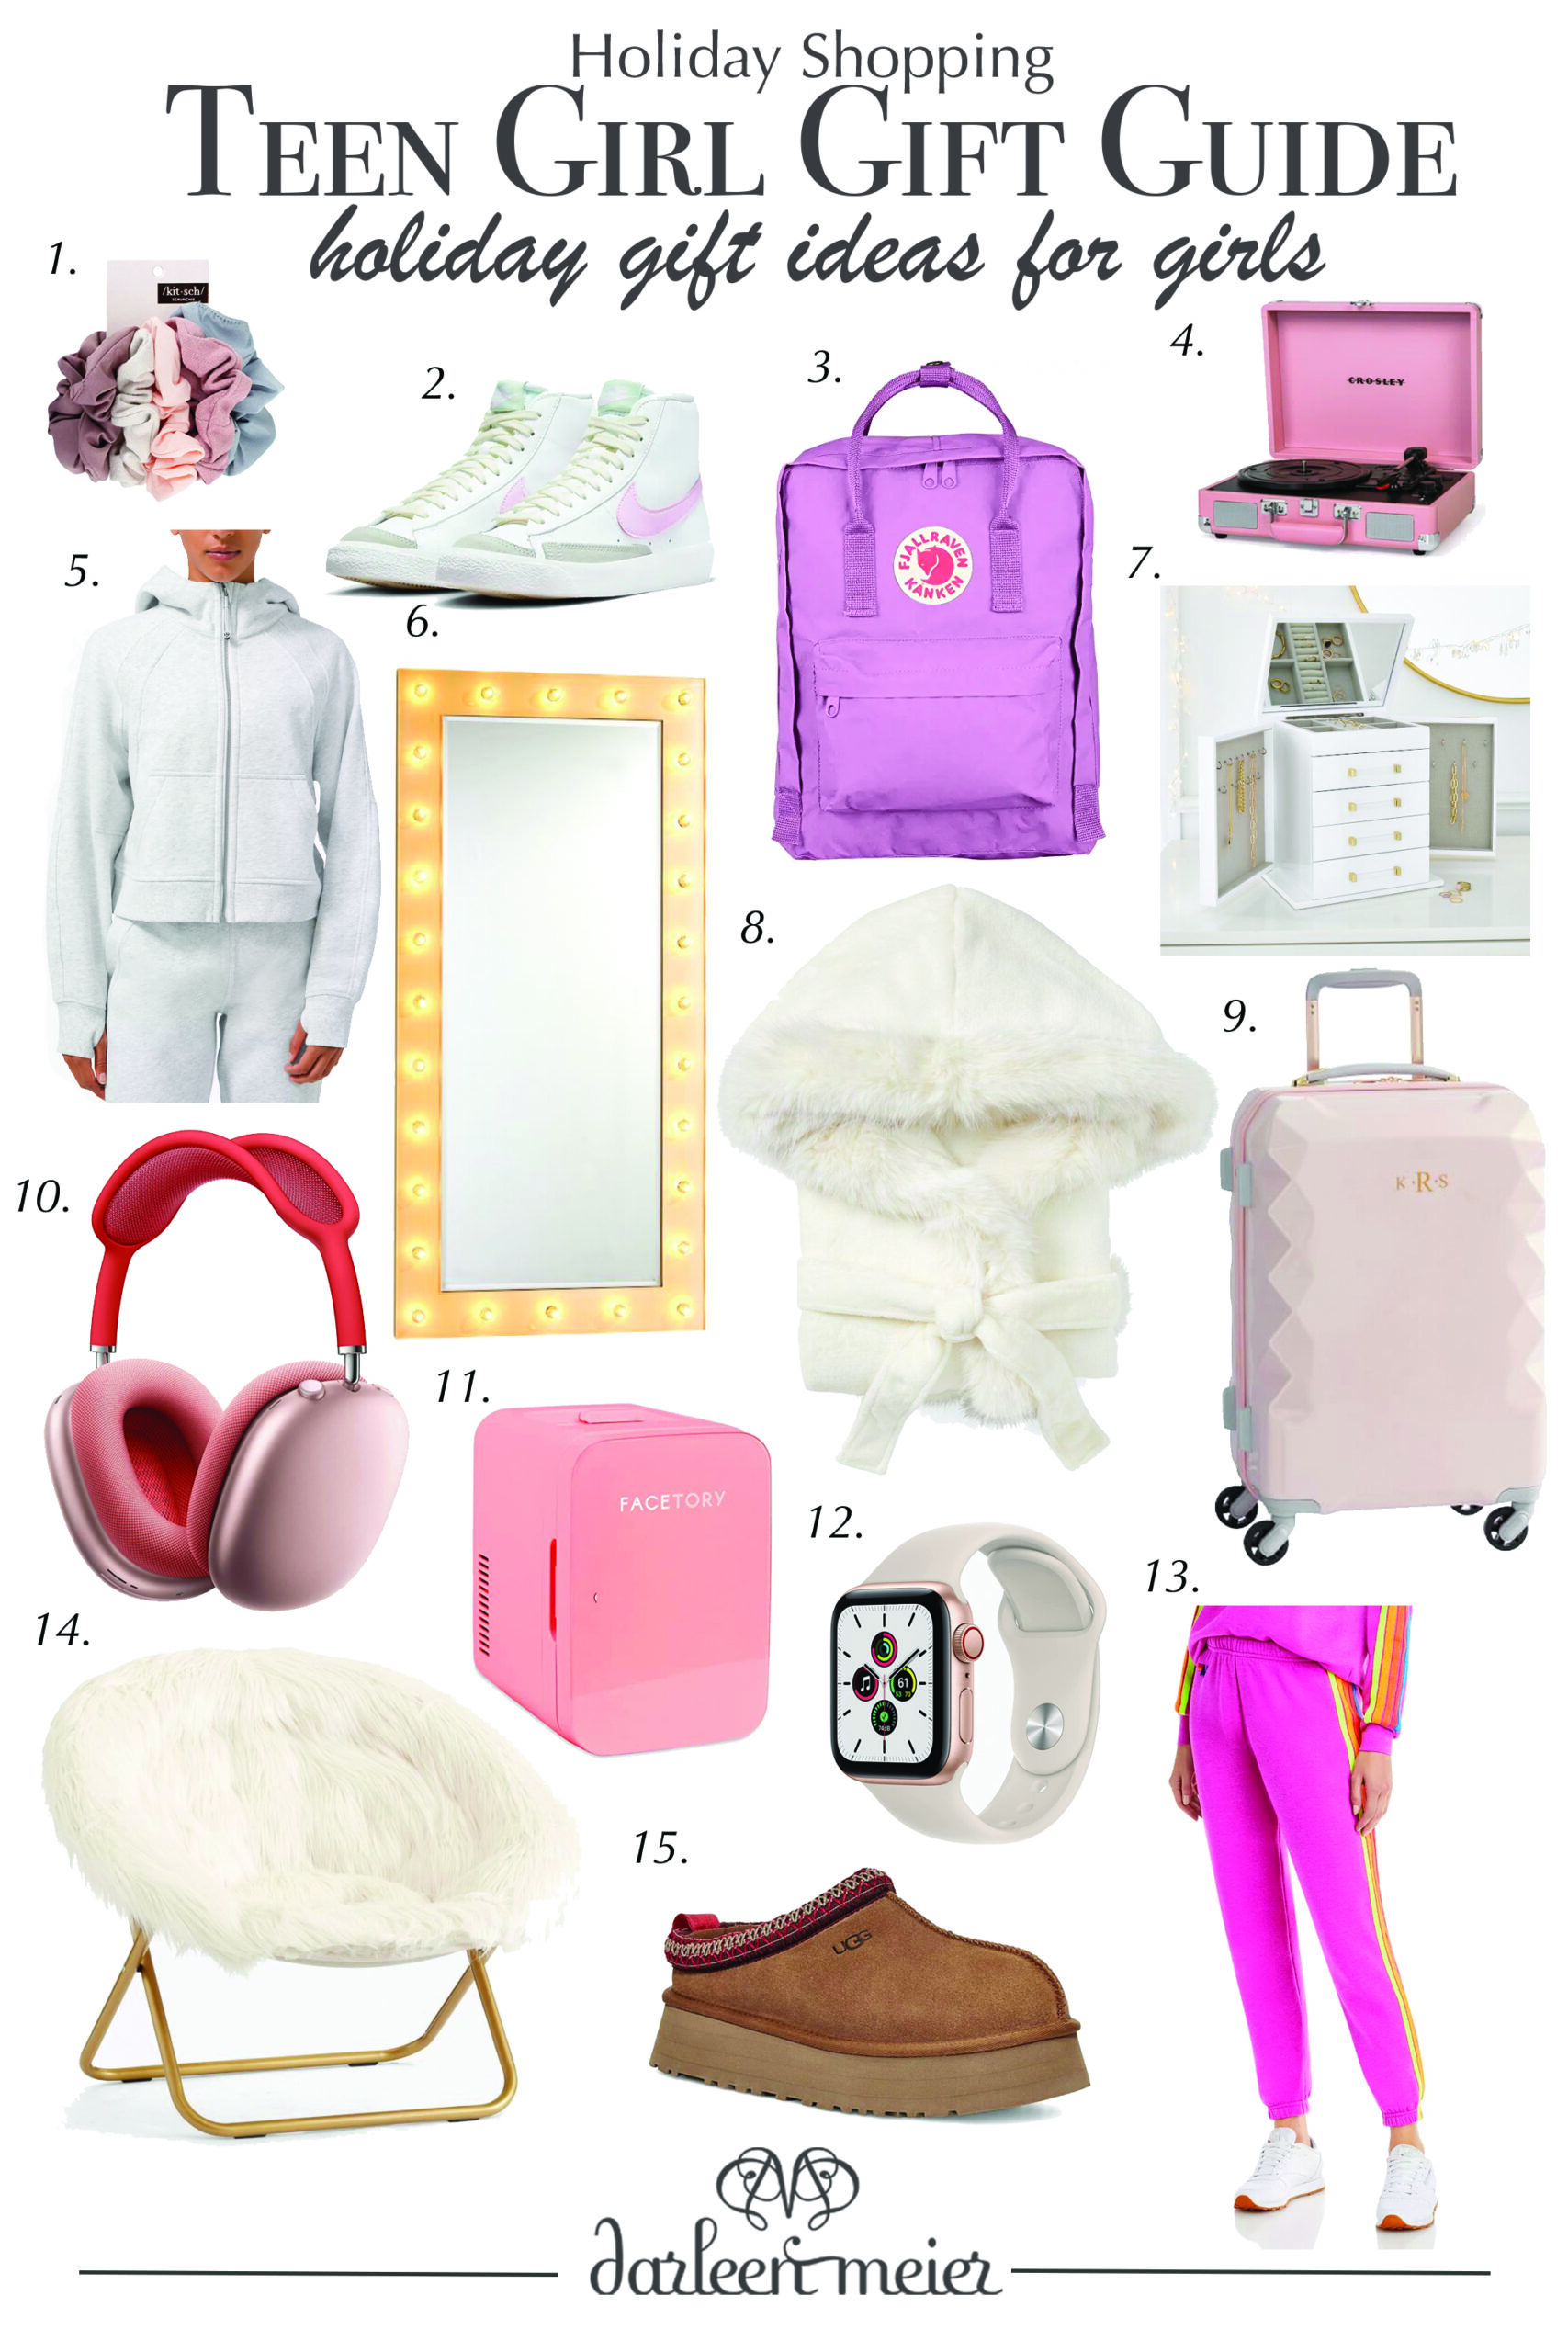 Holiday Wish List for Women, Teens and Girls